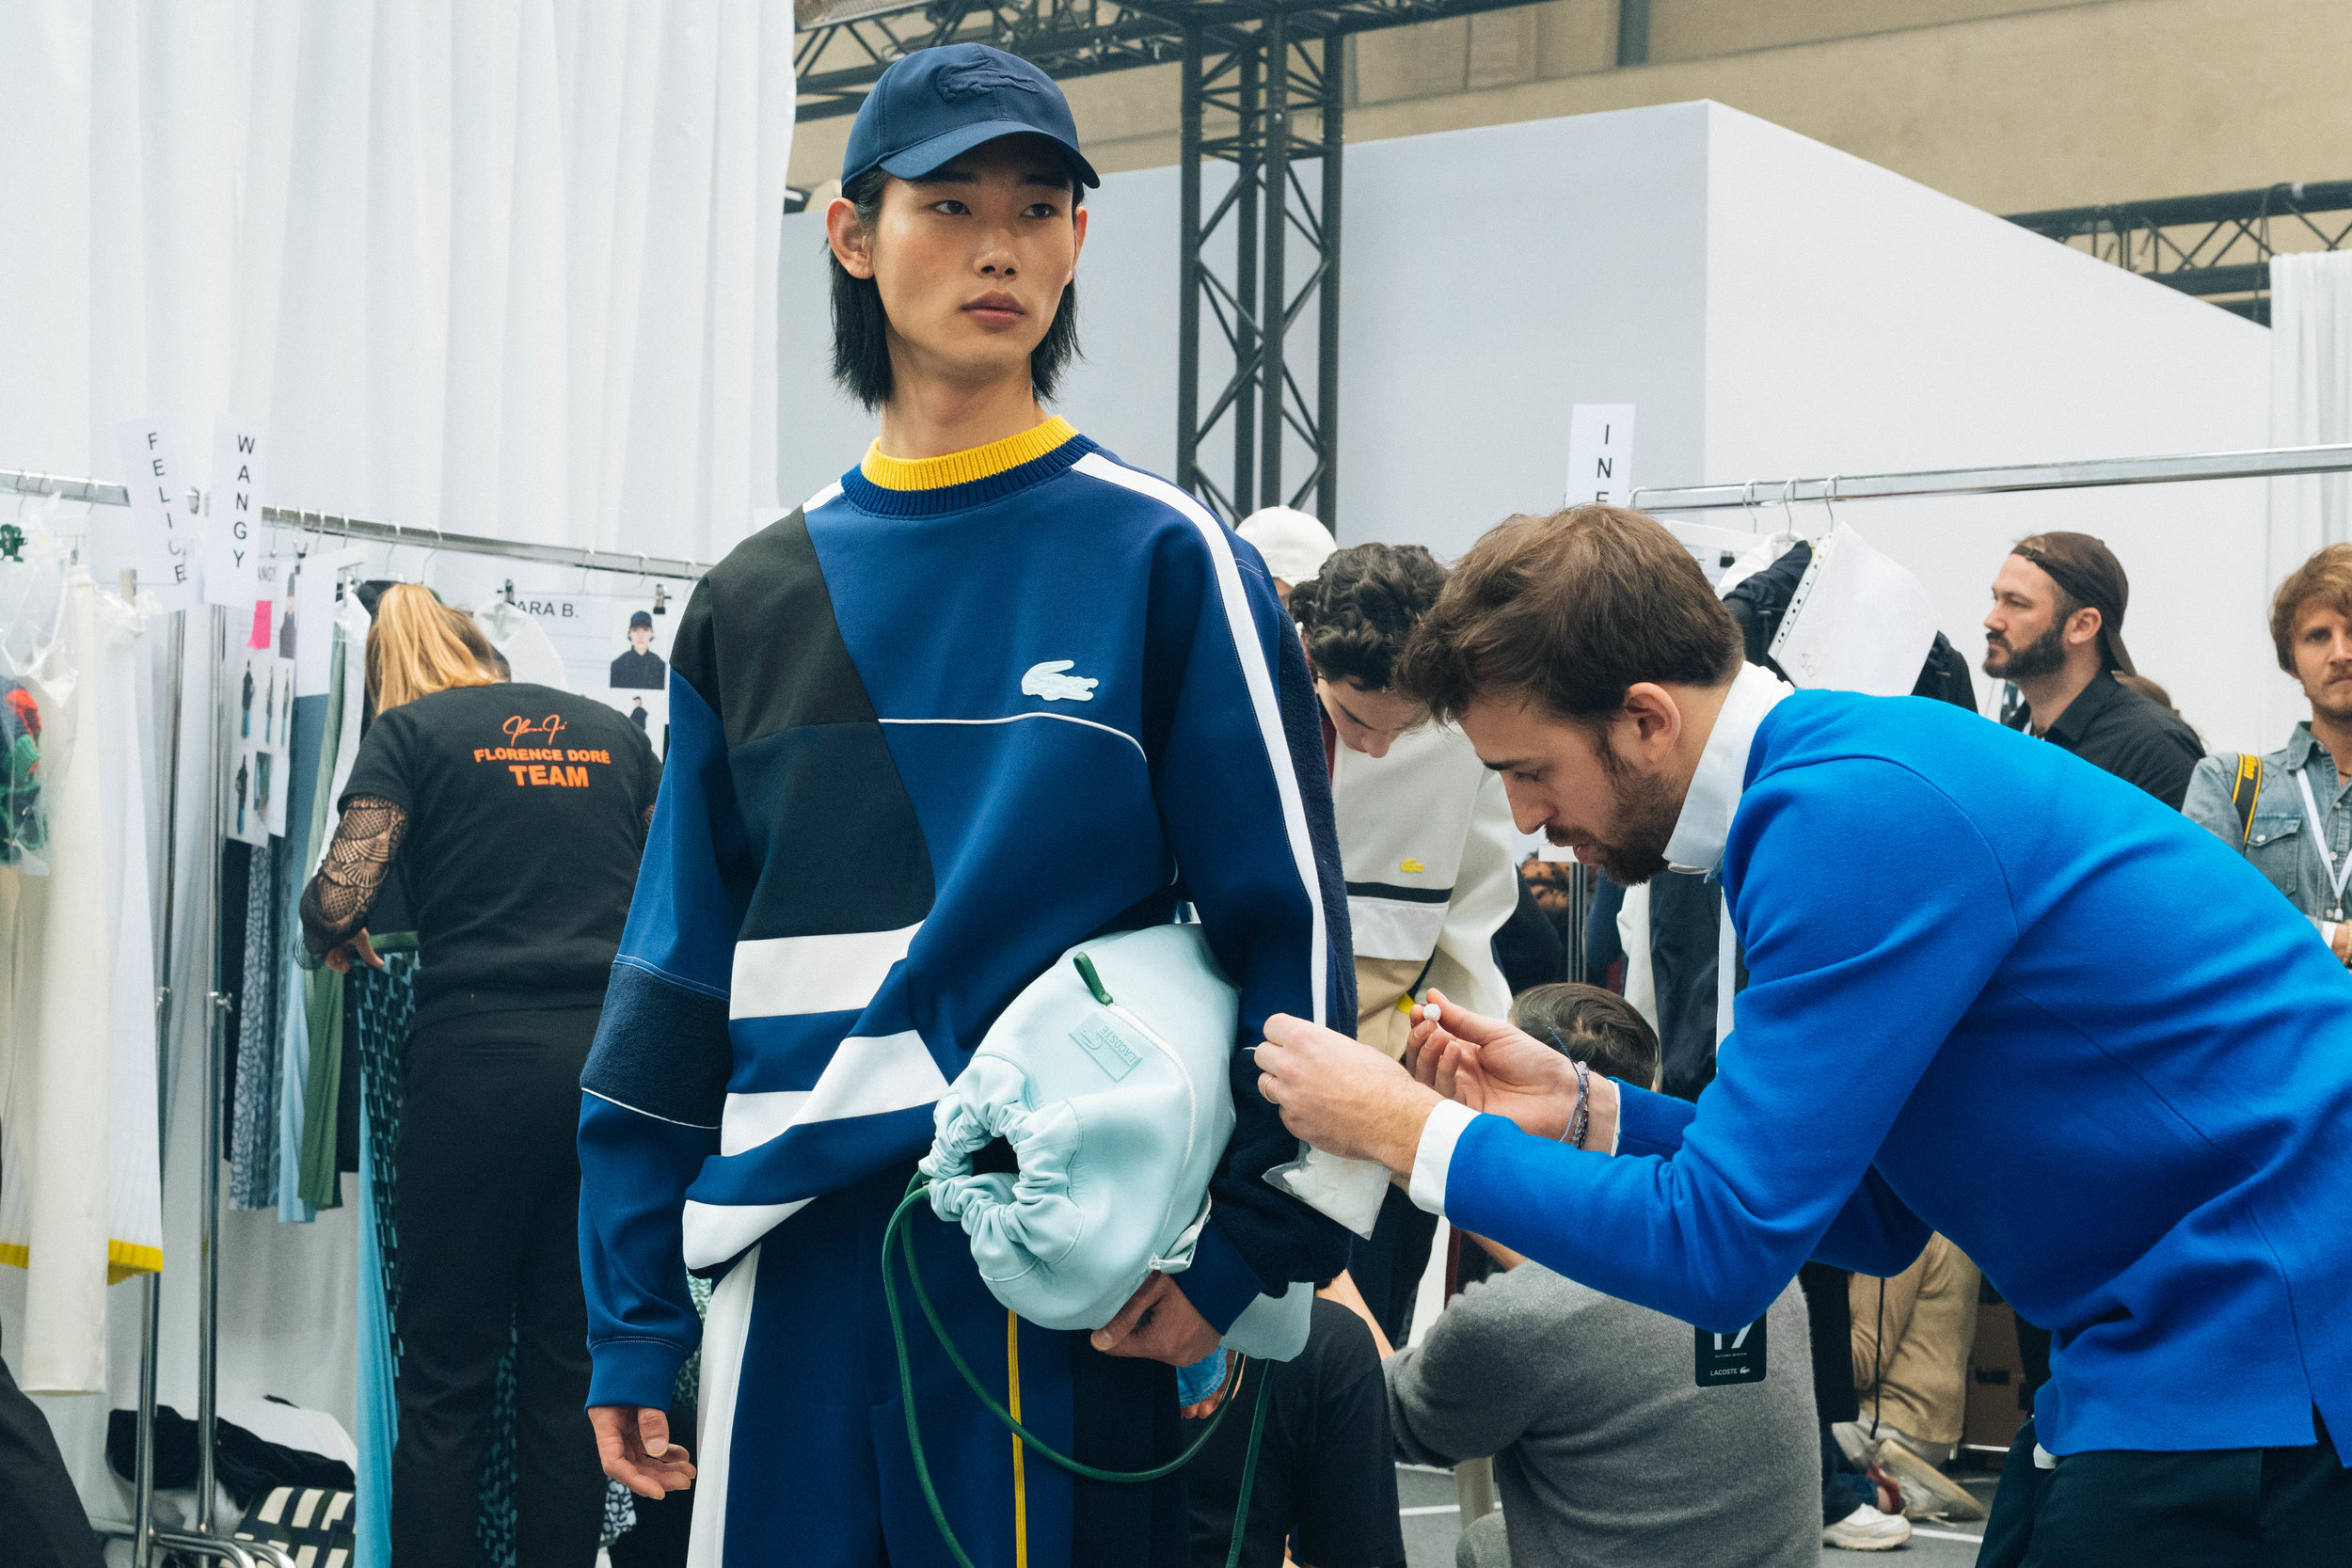  Backstage at the LACOSTE Fall/Winter 2019 runway show in Paris, France on Tuesday, March 5th 2018. Photographed by, Alexandre Faraci. 